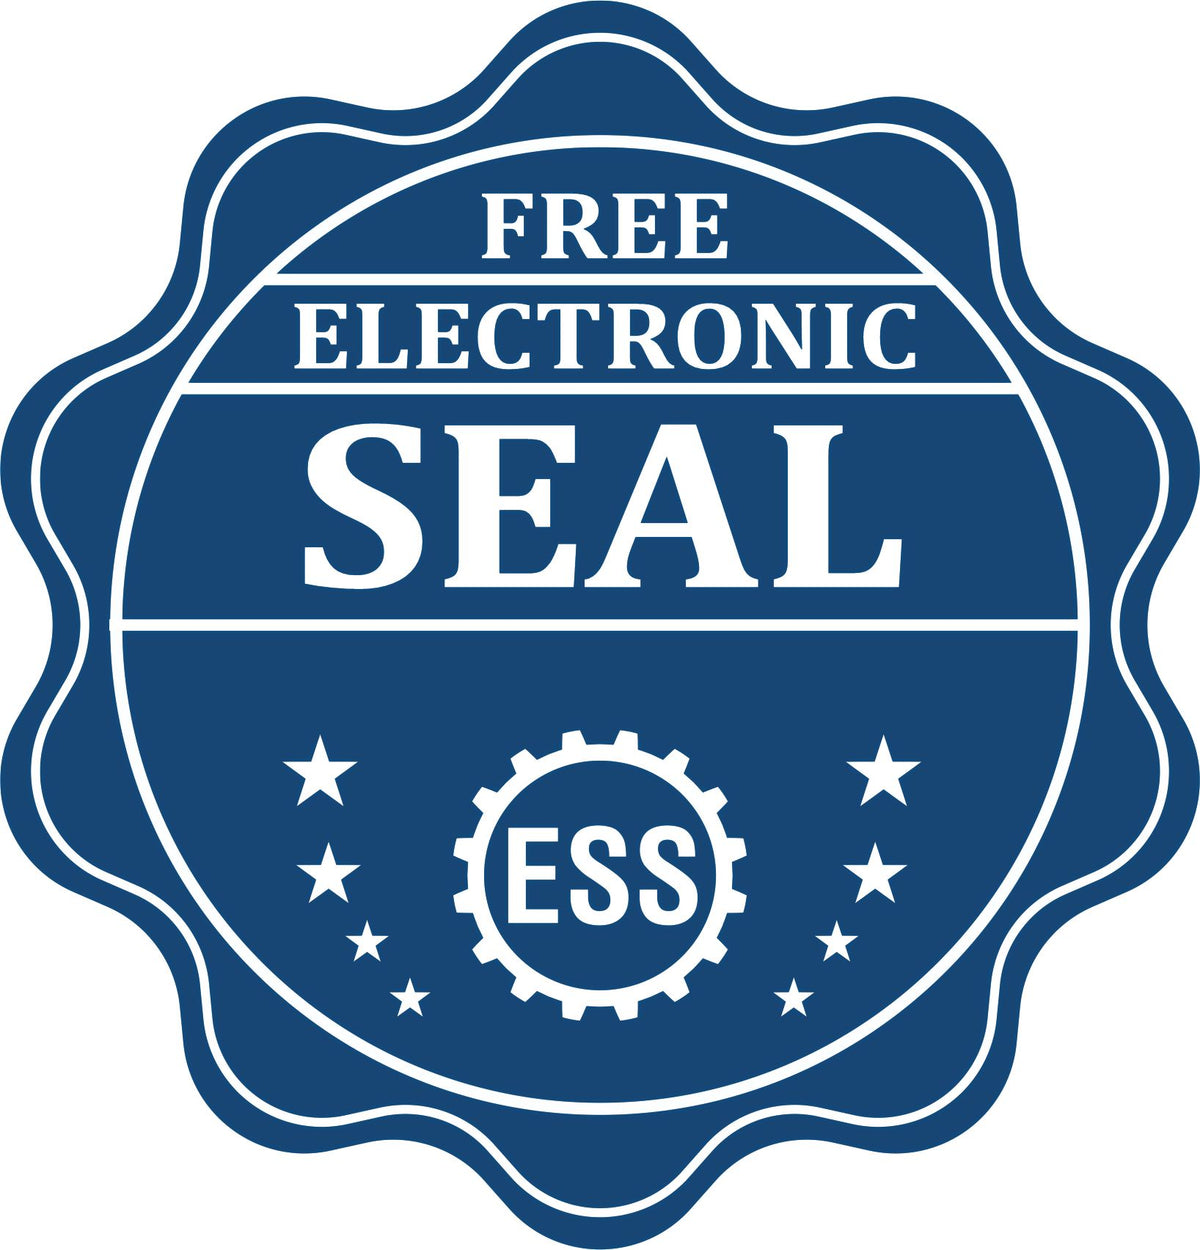 A badge showing a free electronic seal for the Long Reach Minnesota Land Surveyor Seal with stars and the ESS gear on the emblem.